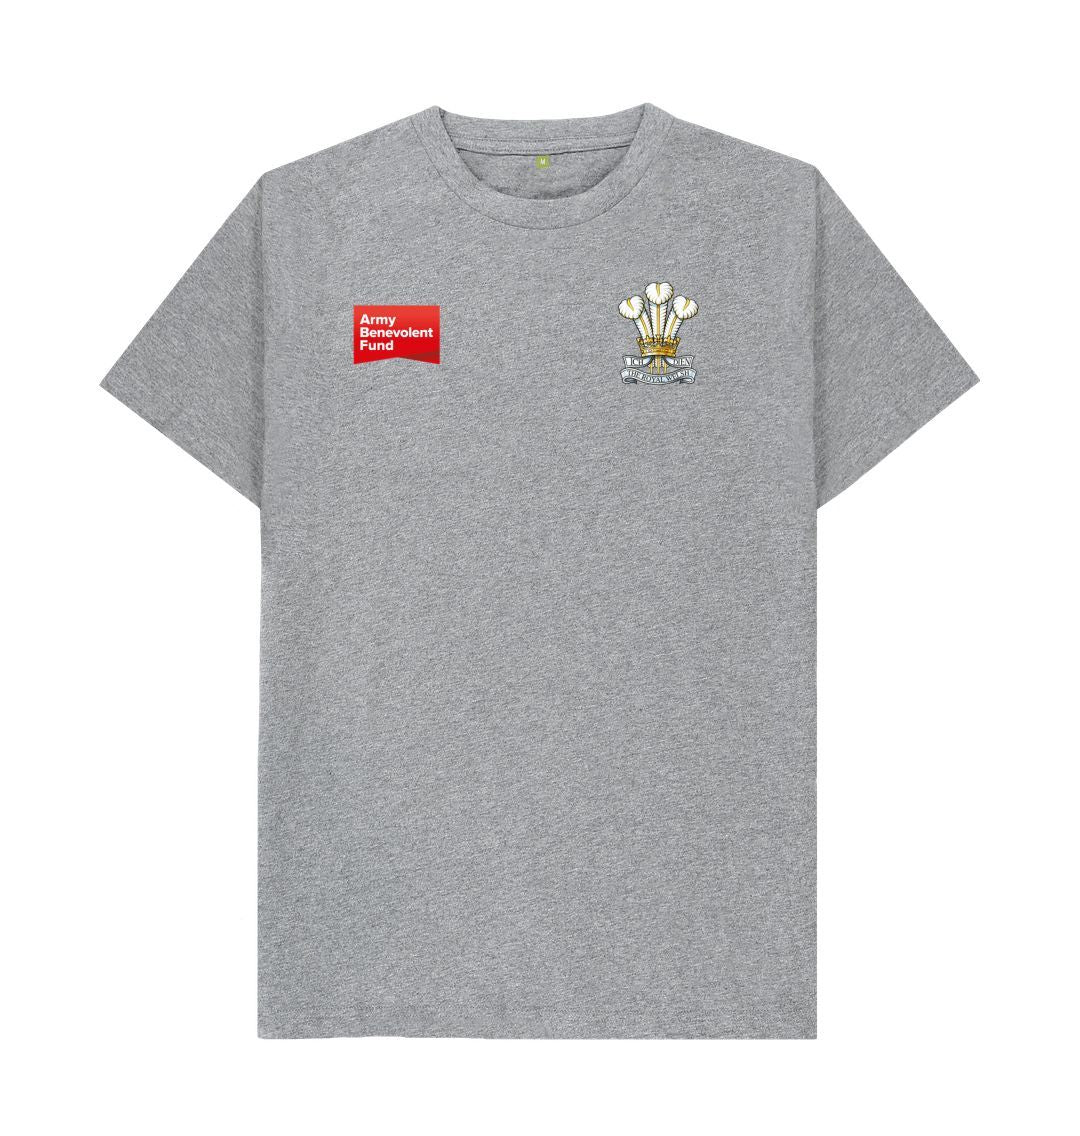 The Royal Welsh Unisex T-shirt - Army Benevolent Fund